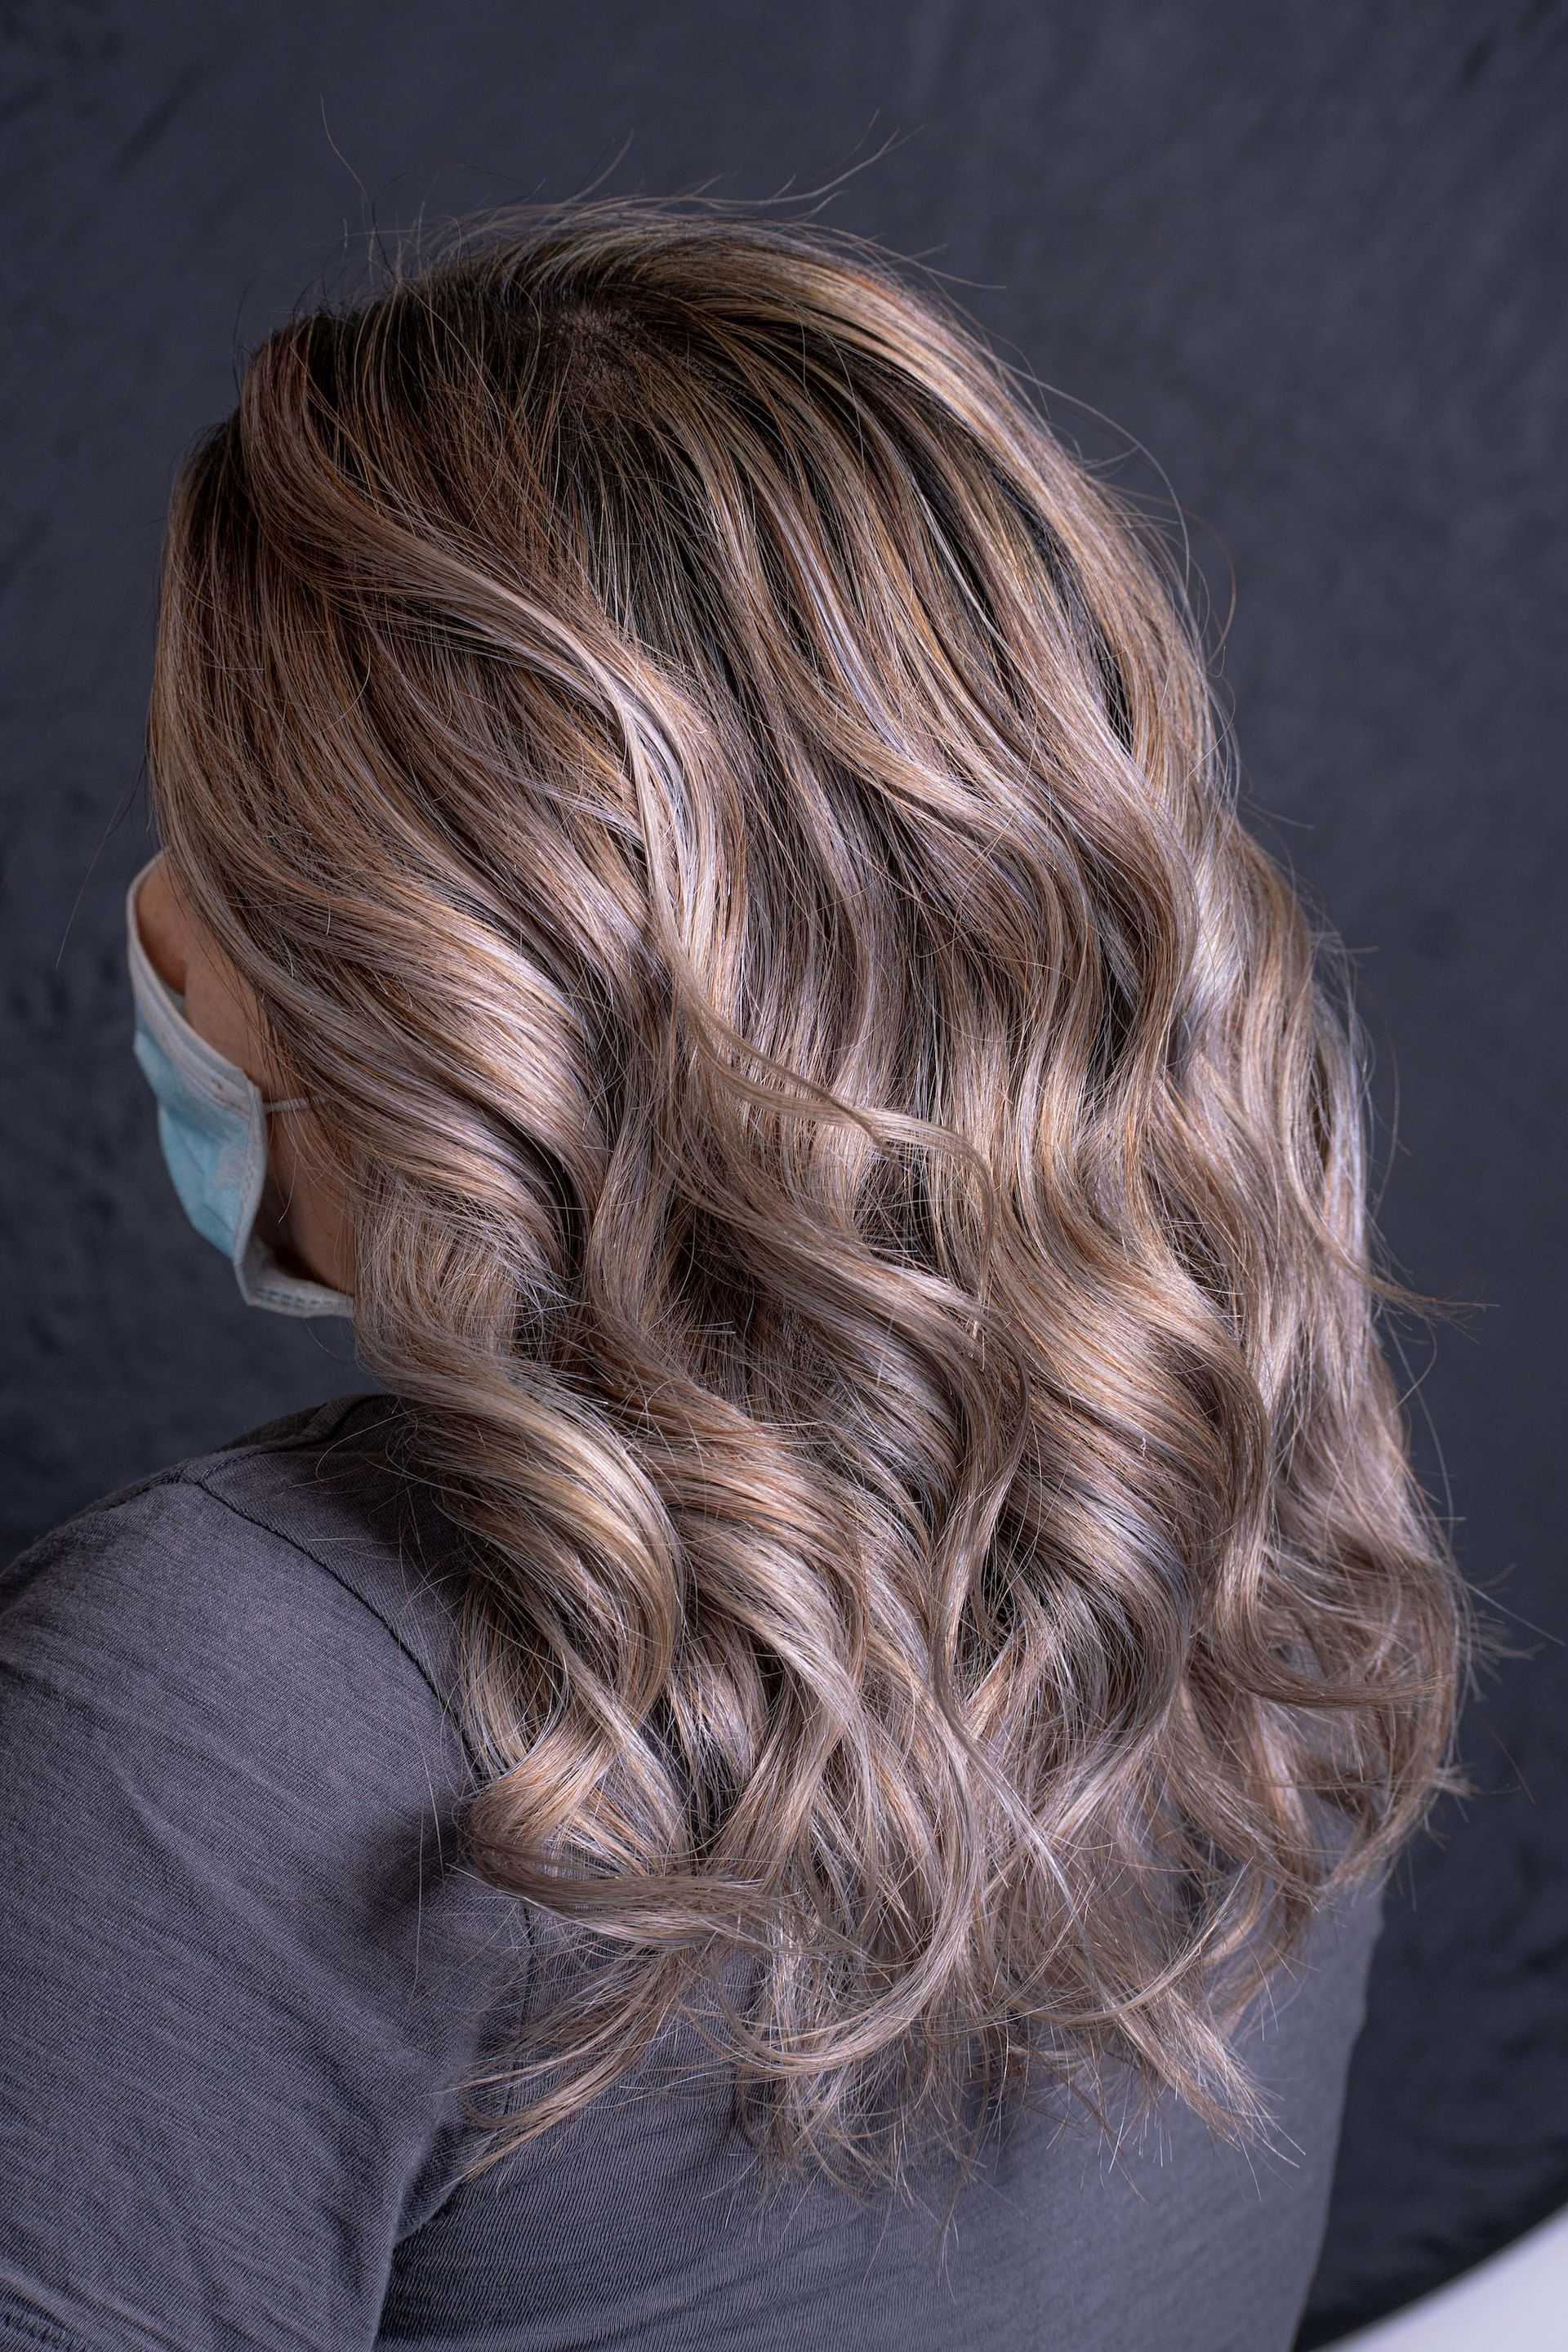 Everything You Need to Know About Hair Highlights